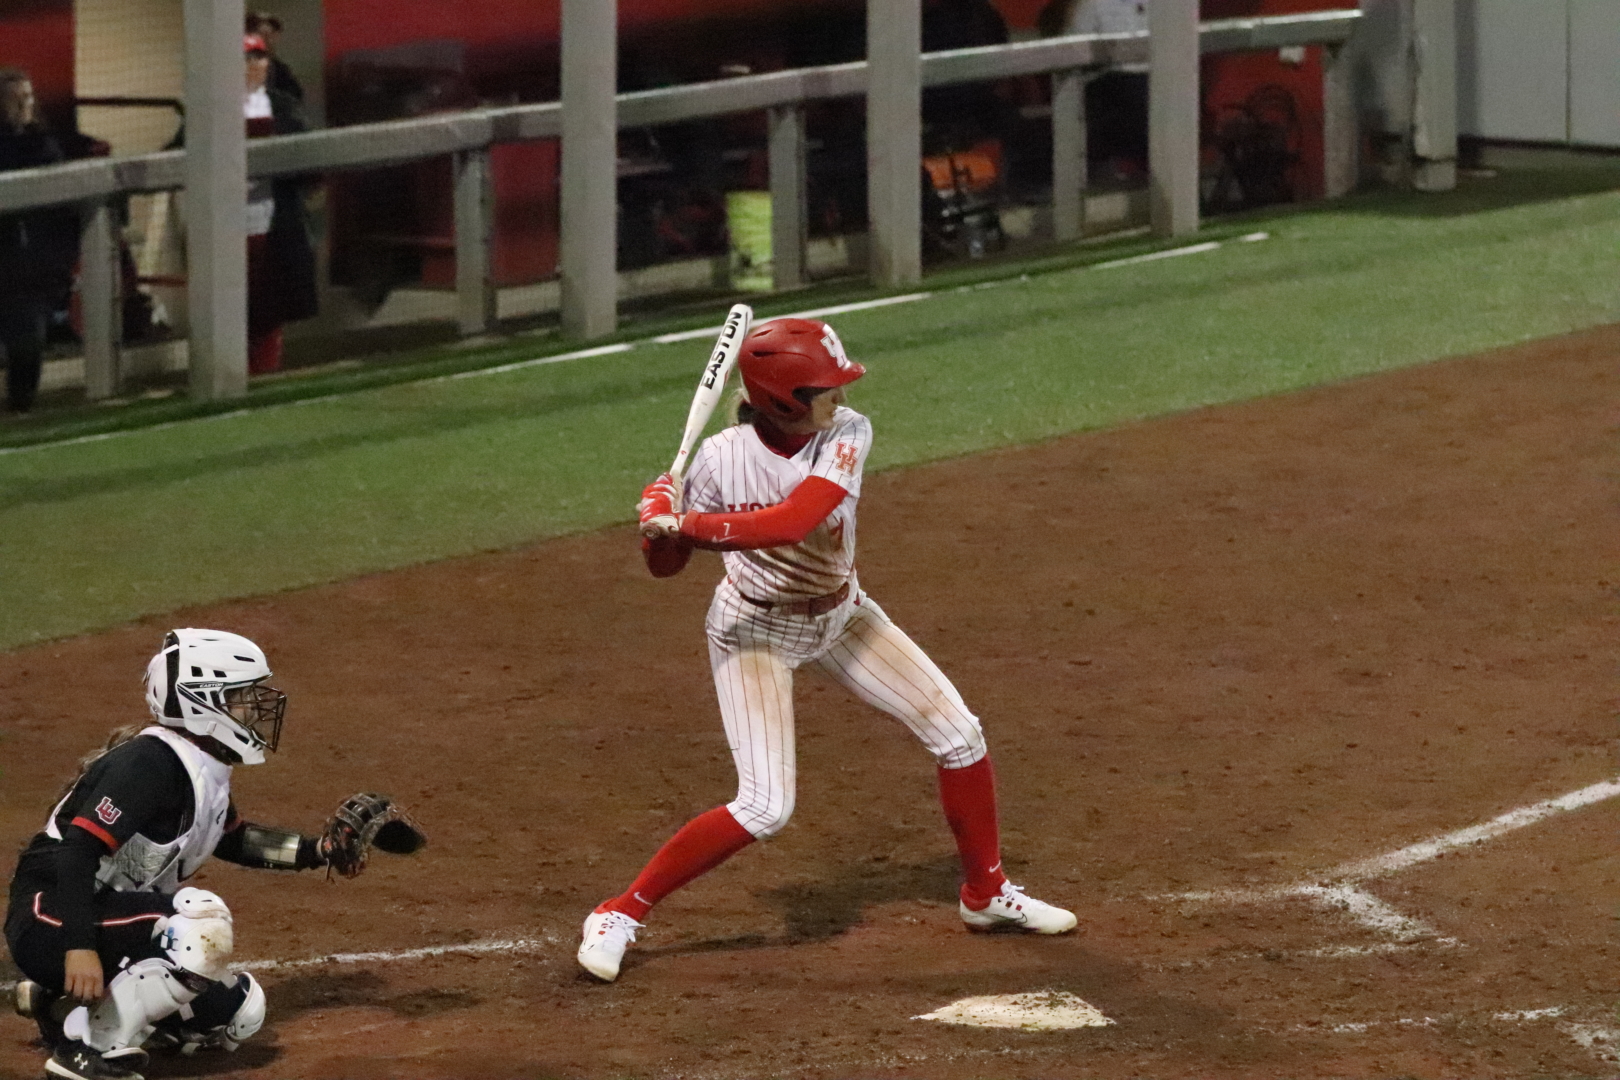 UH softball second baseman Becca Schulte hit her third home run of the season in the Cougars' win over Texas A&M CC on Saturday. | James Mueller/The Cougar